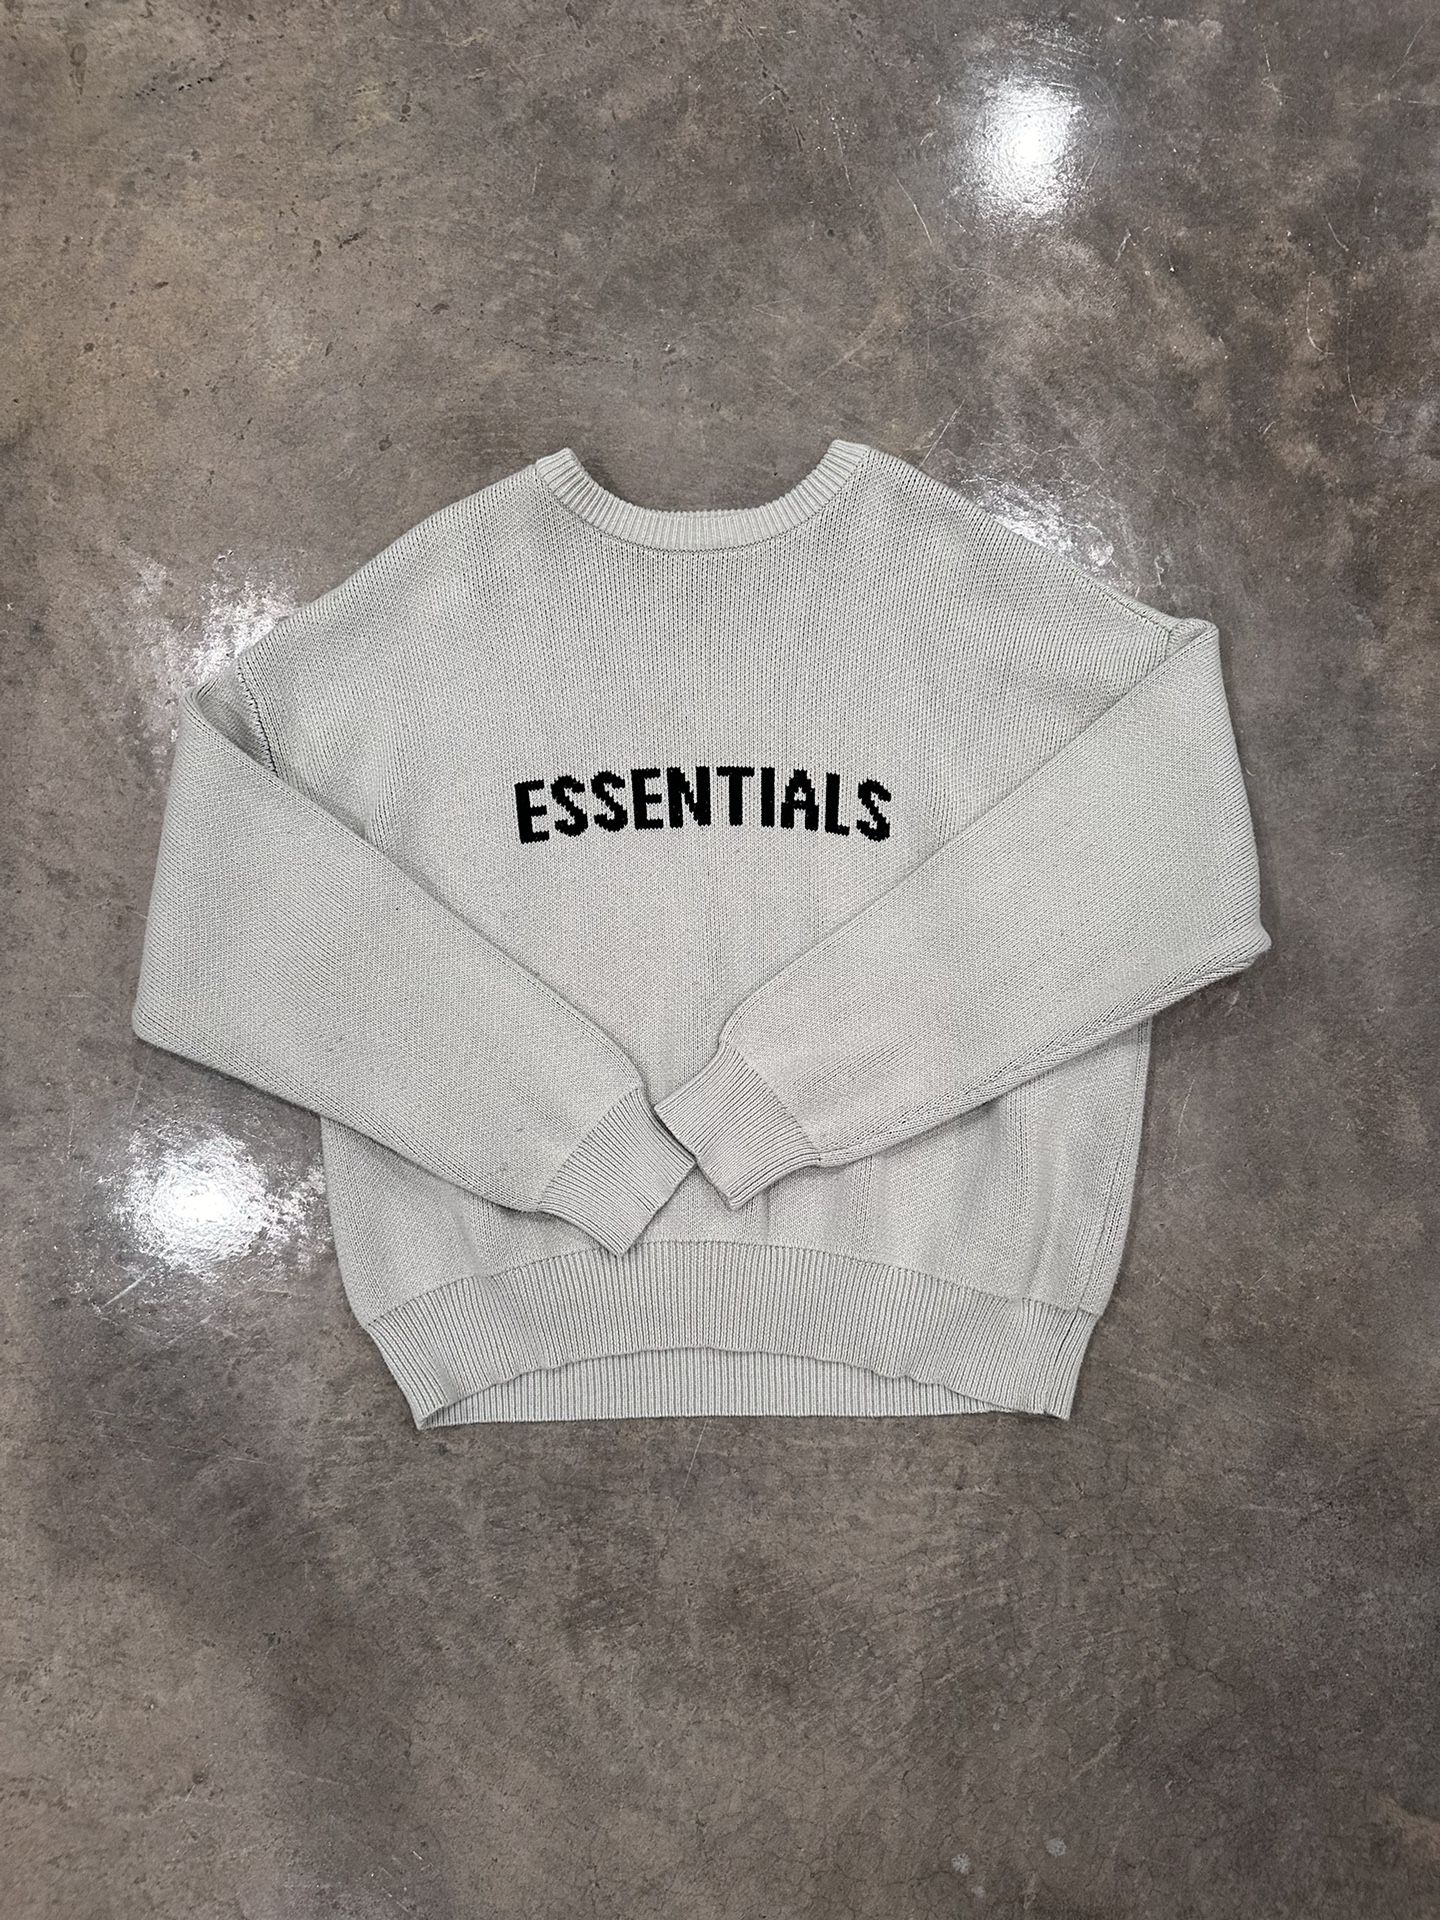 EXCLUSIVE FEAR OF GOD PULLOVER SWEATER